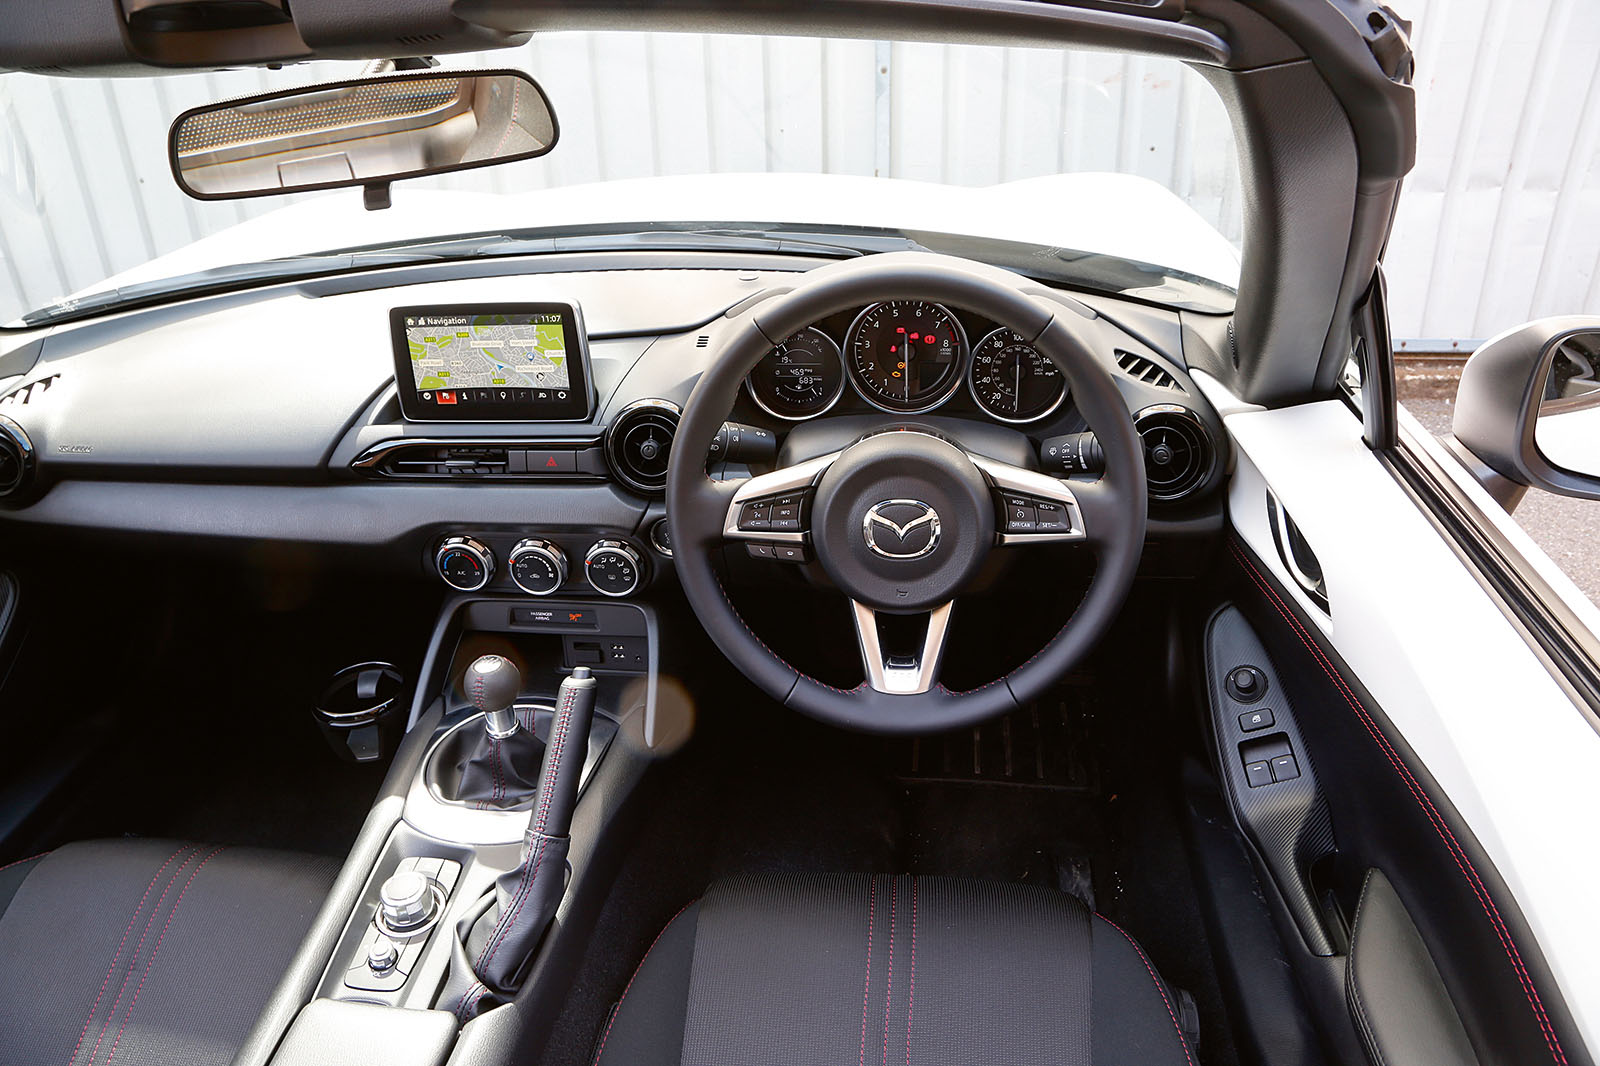 The view from the driver's seat in the Mazda MX-5